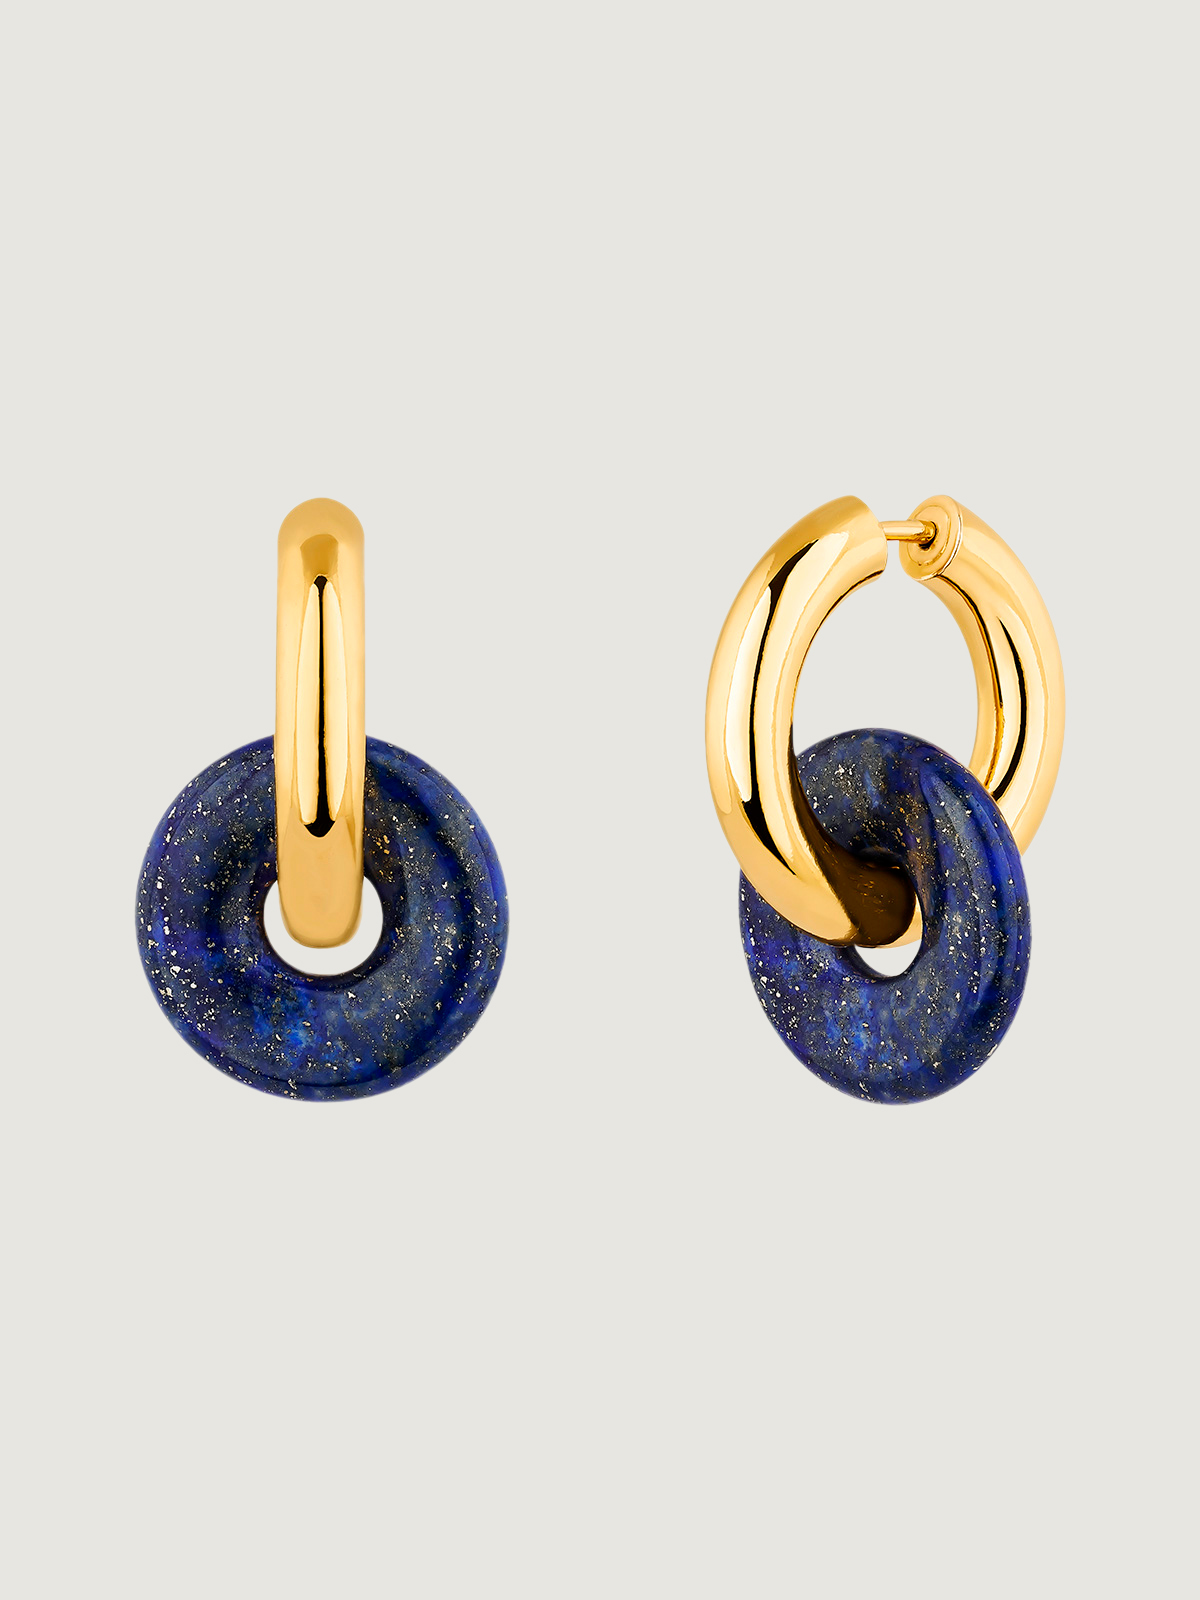 925 Silver hoop earrings plated in 18K Yellow Gold with Lapis Lazuli